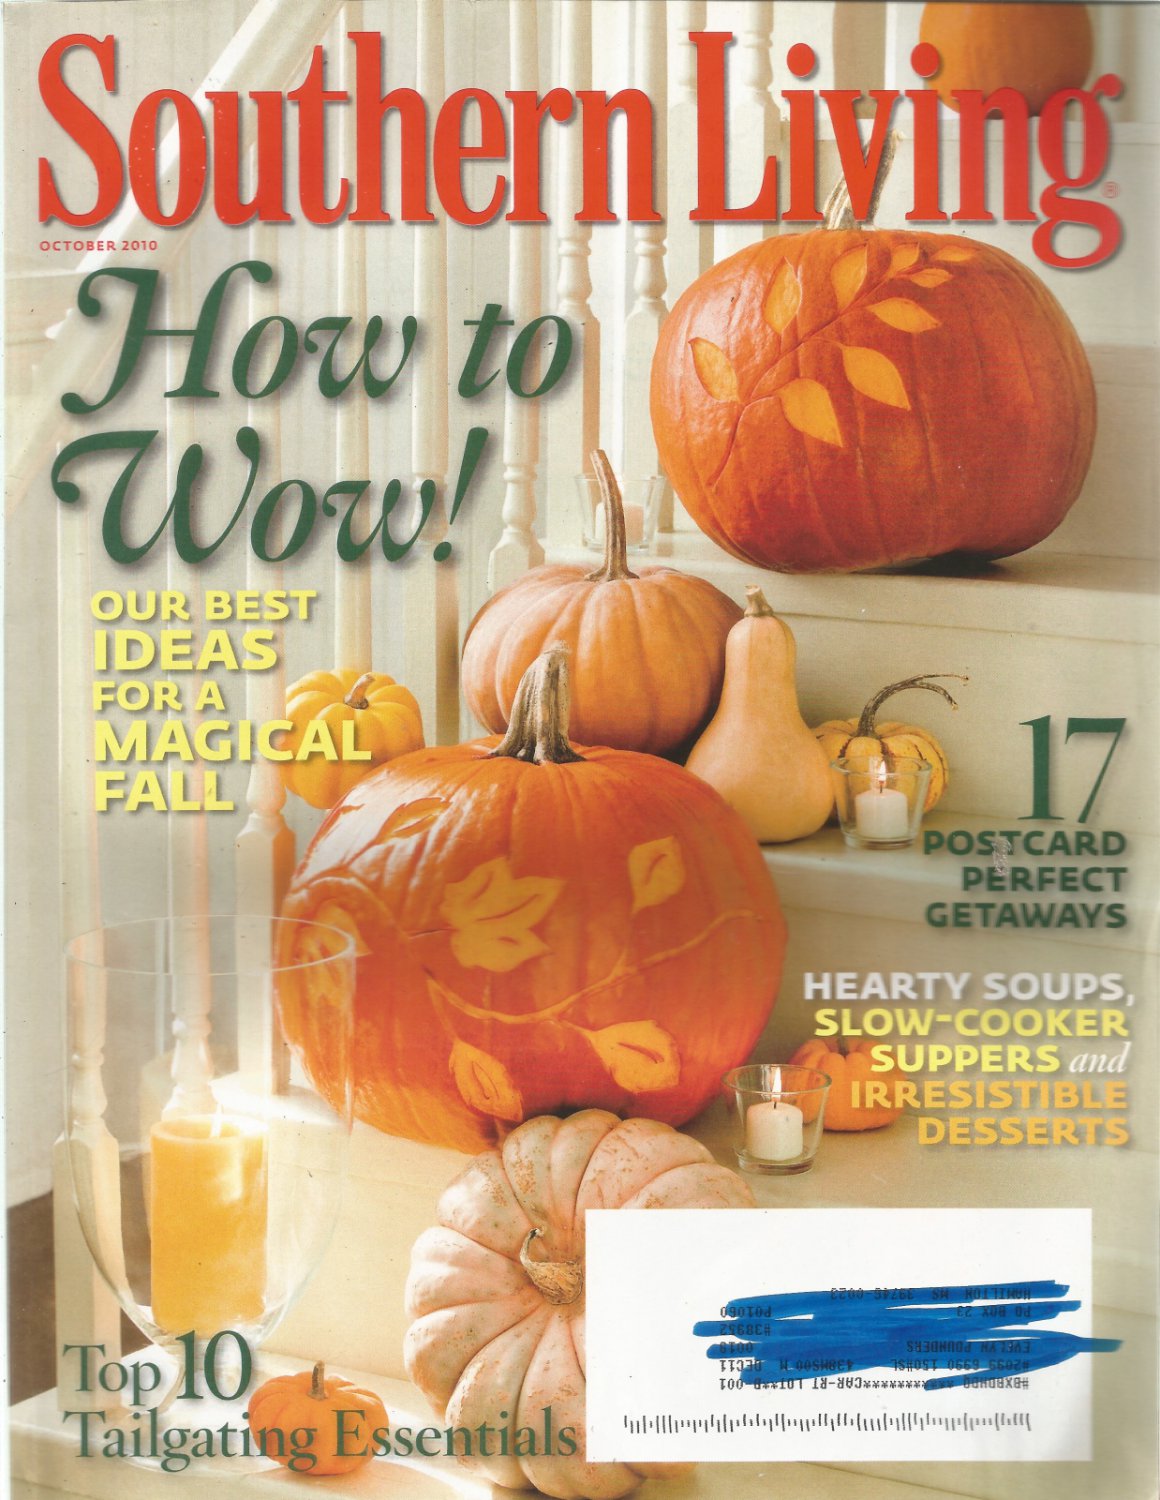 Southern Living magazine- October 2010- ideas for a magical fall